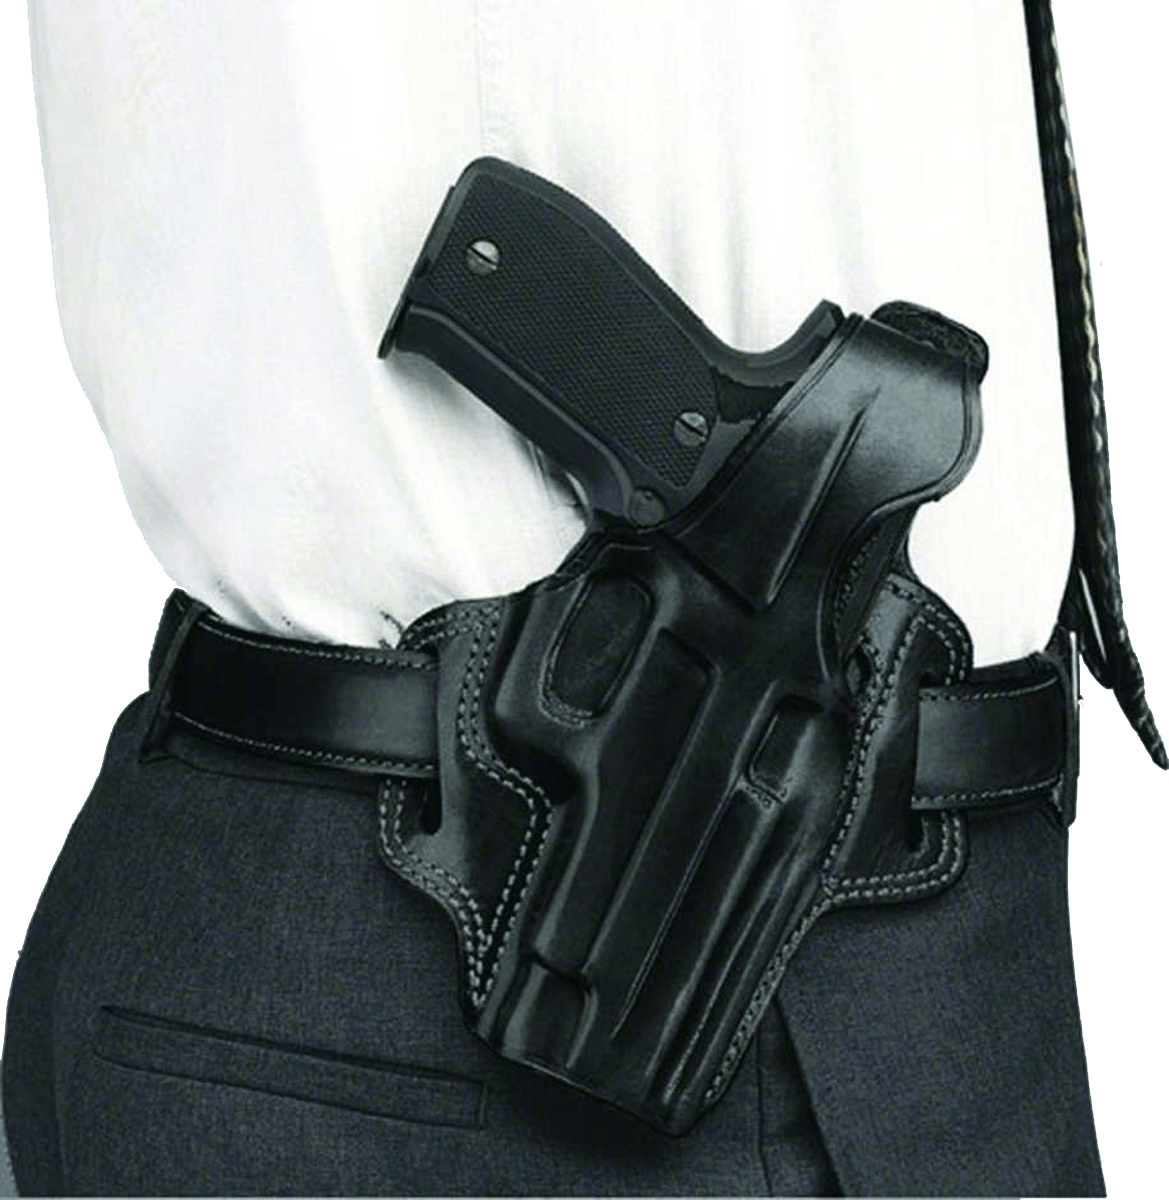 Galco Galco Fletch High Ride Belt - Holster Rh Leather L Frm 4" B Holsters And Related Items